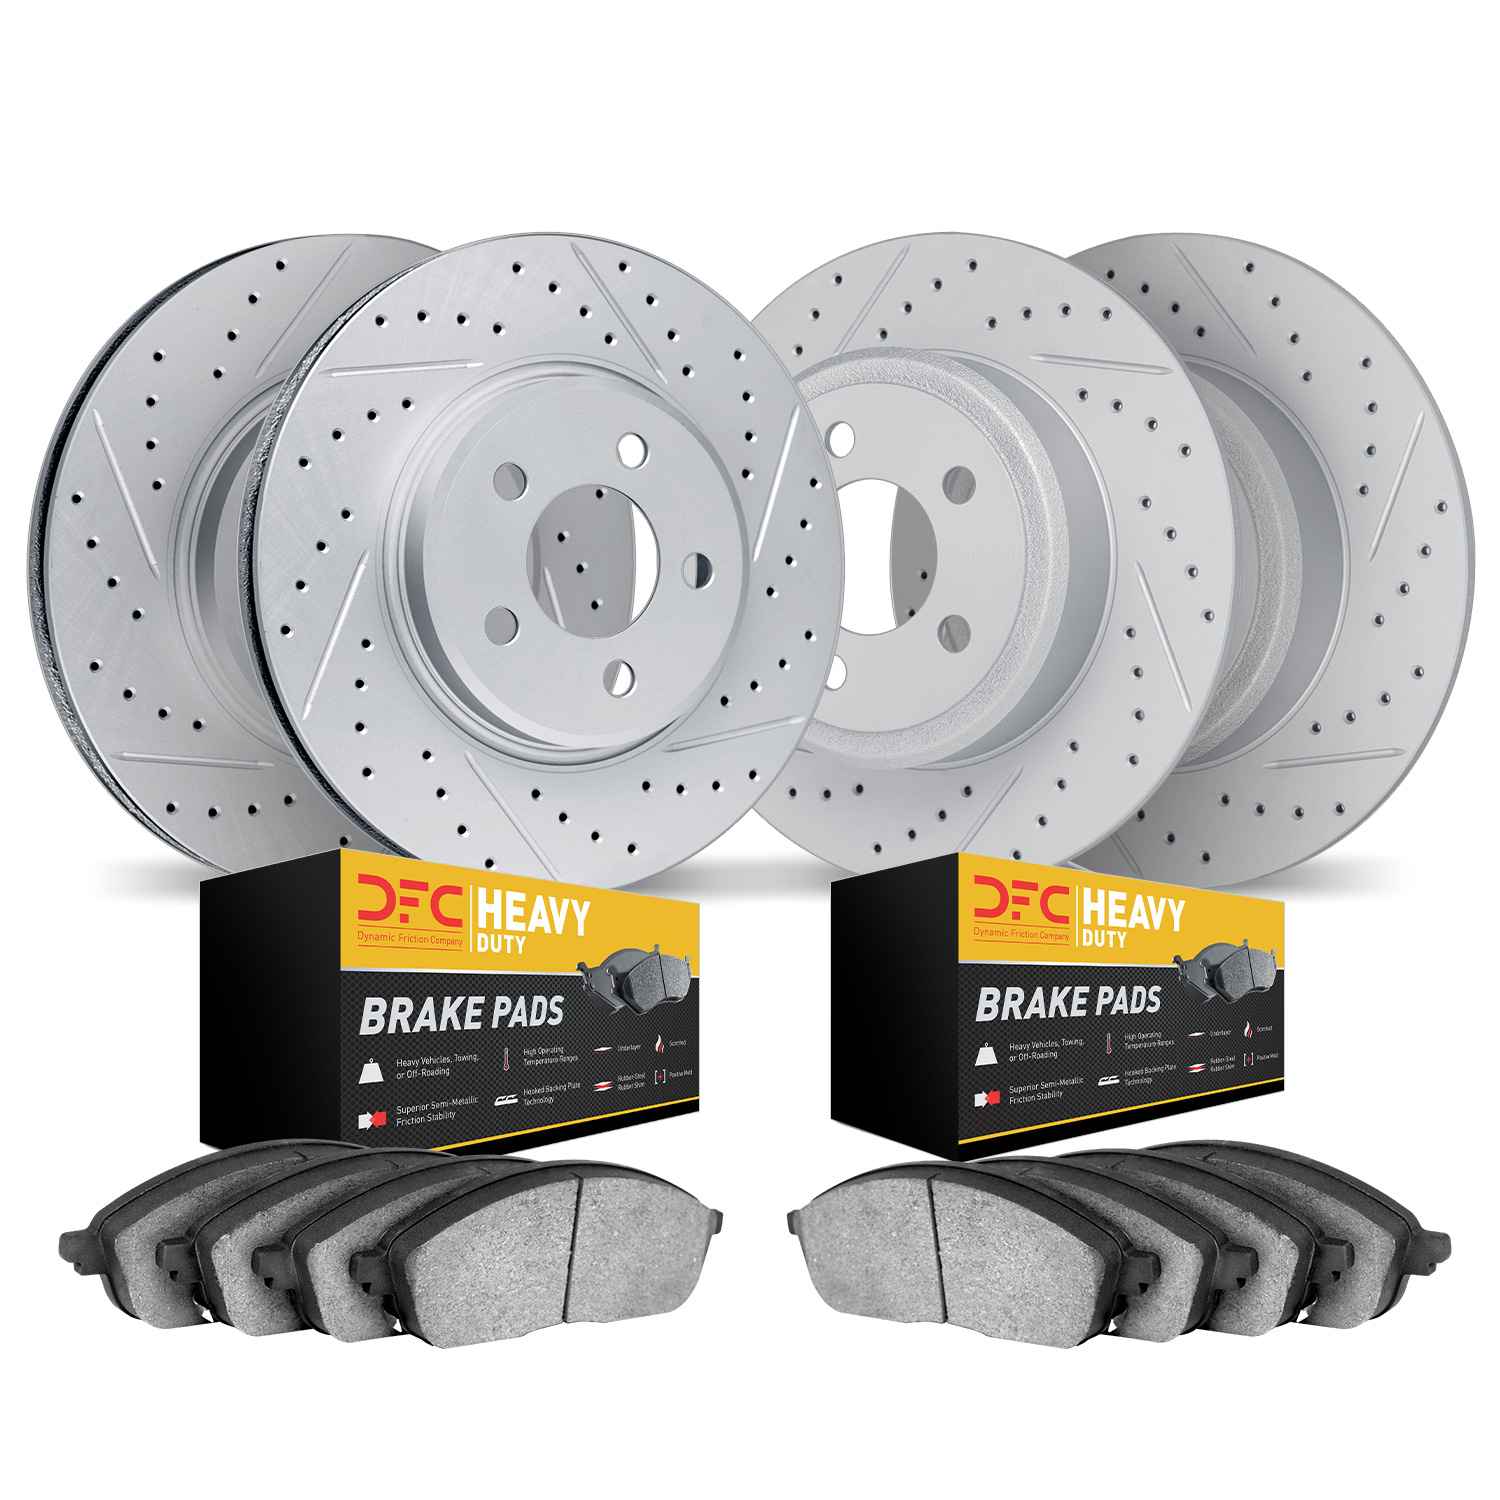 2204-42002 Geoperformance Drilled/Slotted Rotors w/Heavy-Duty Pads Kit, Fits Select Mopar, Position: Front and Rear